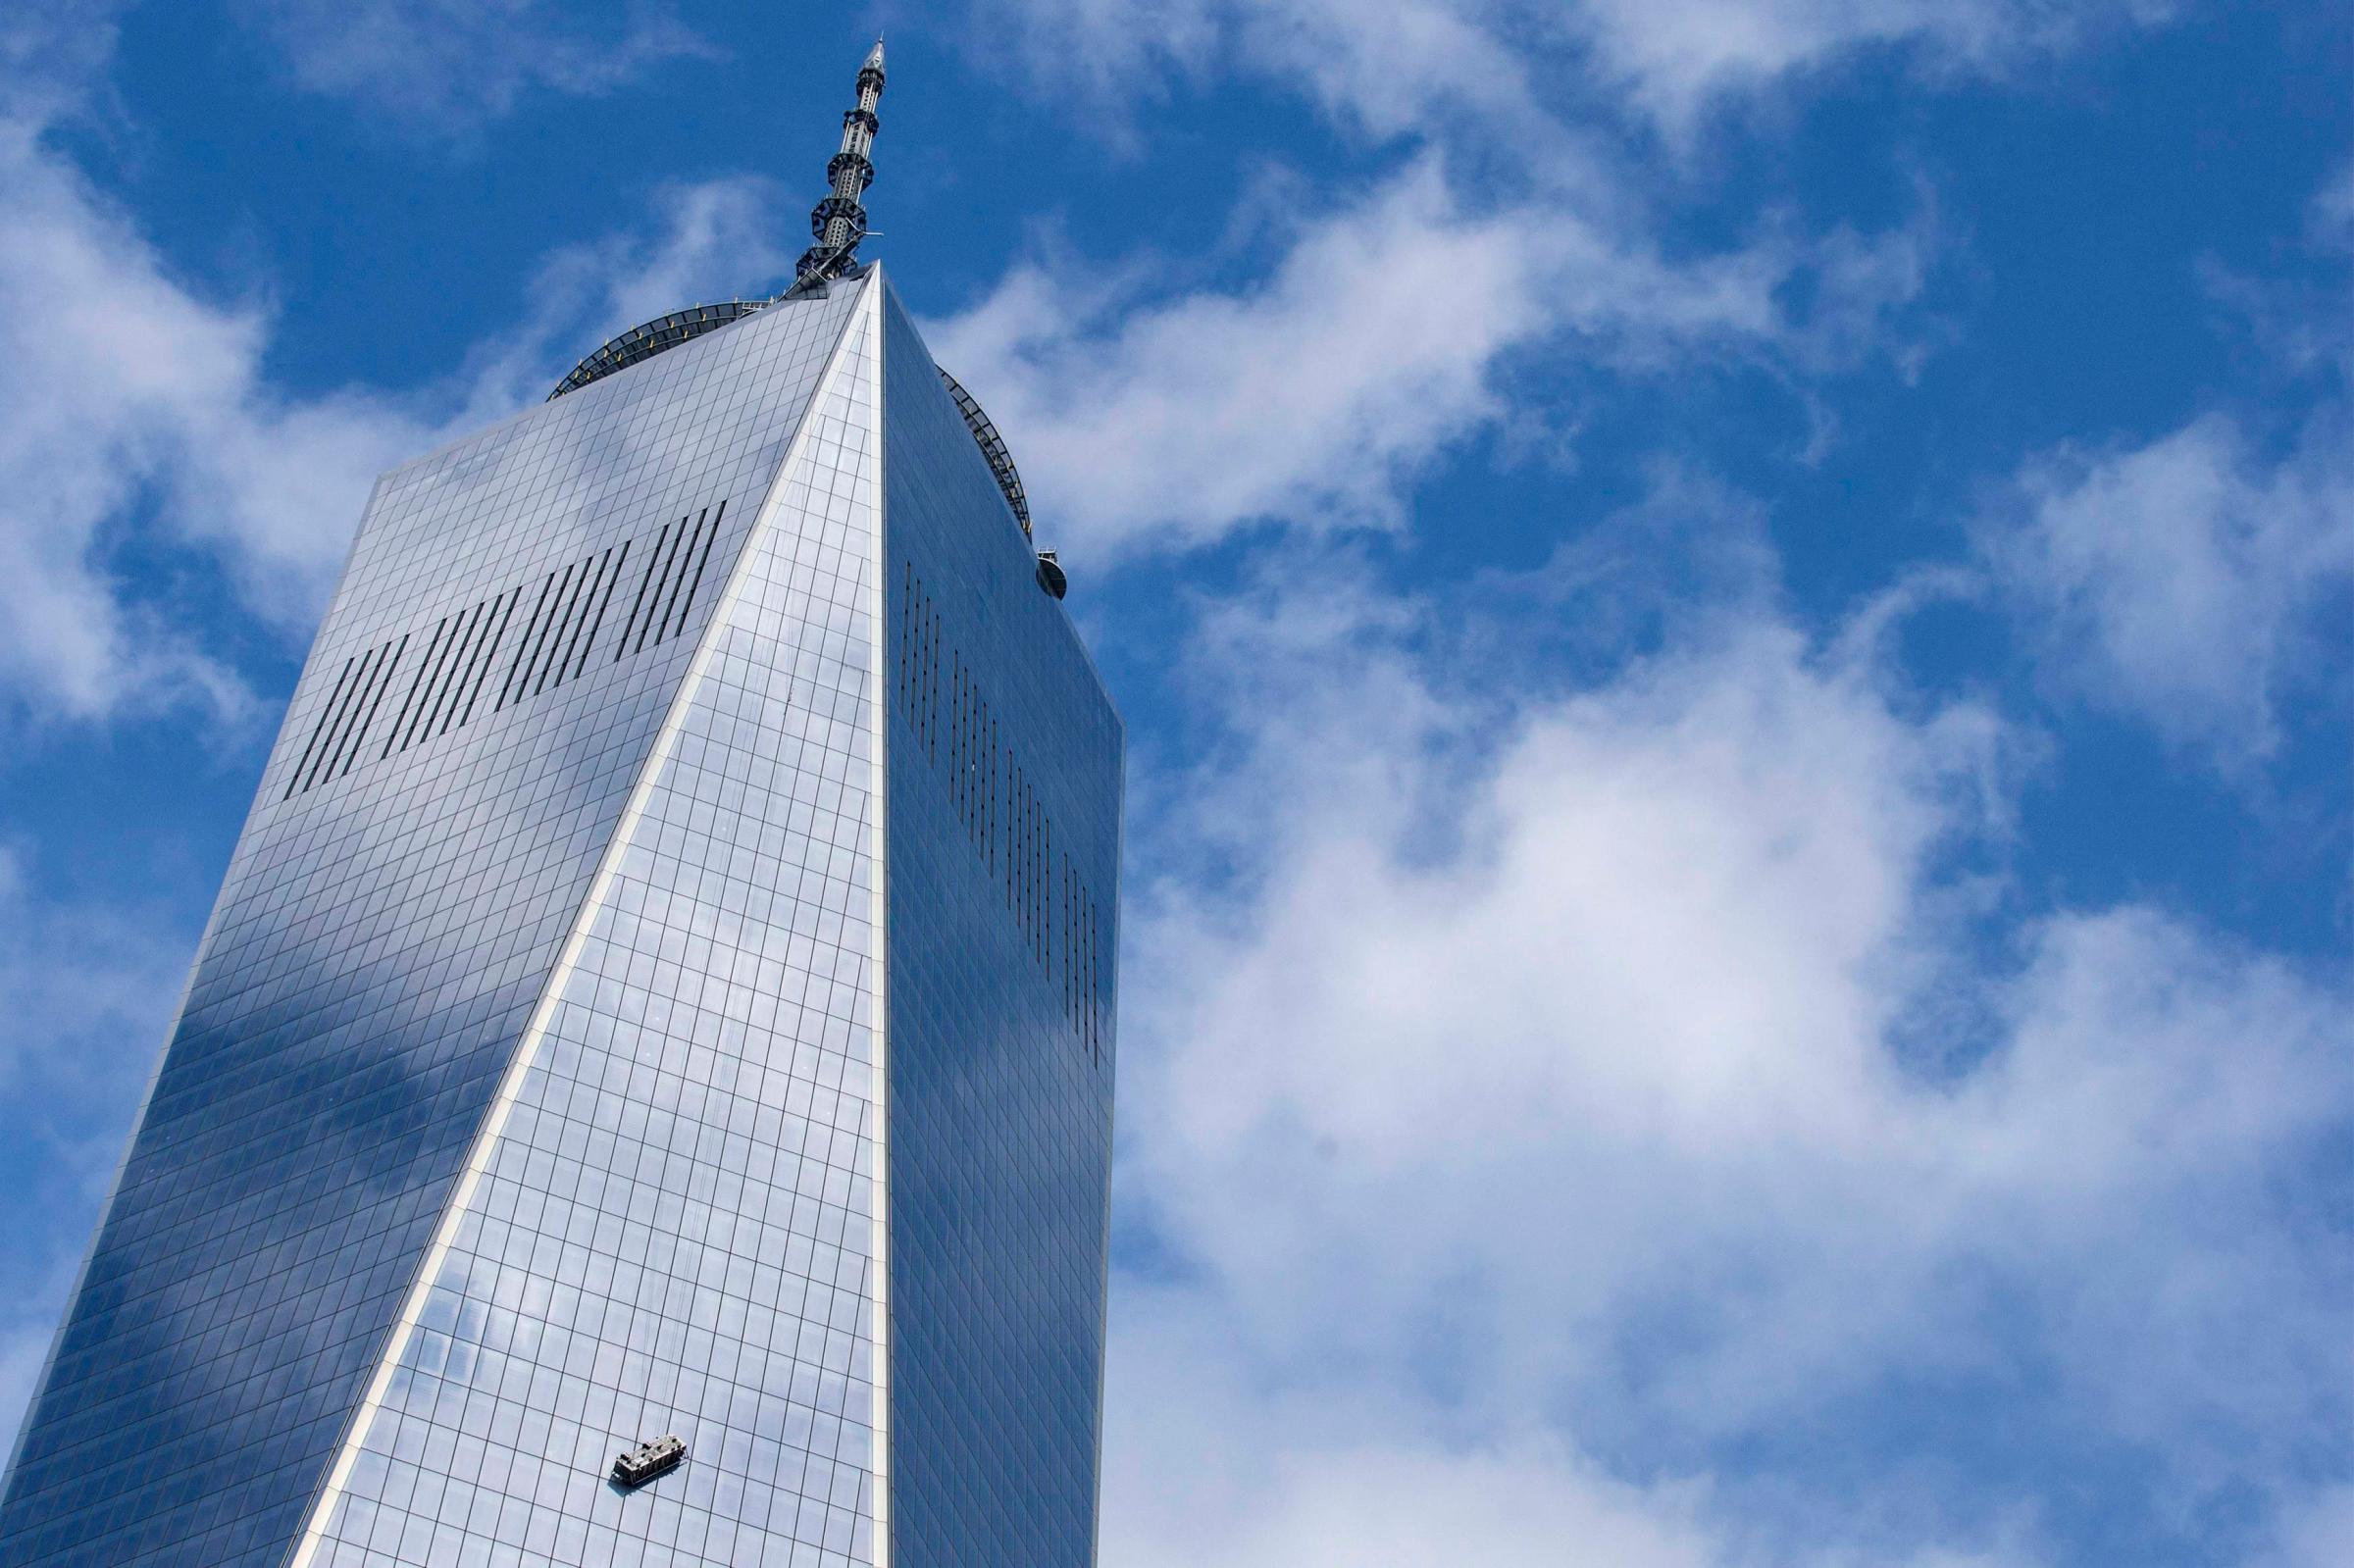 Stranded window washers hang on the side of One World Trade Center